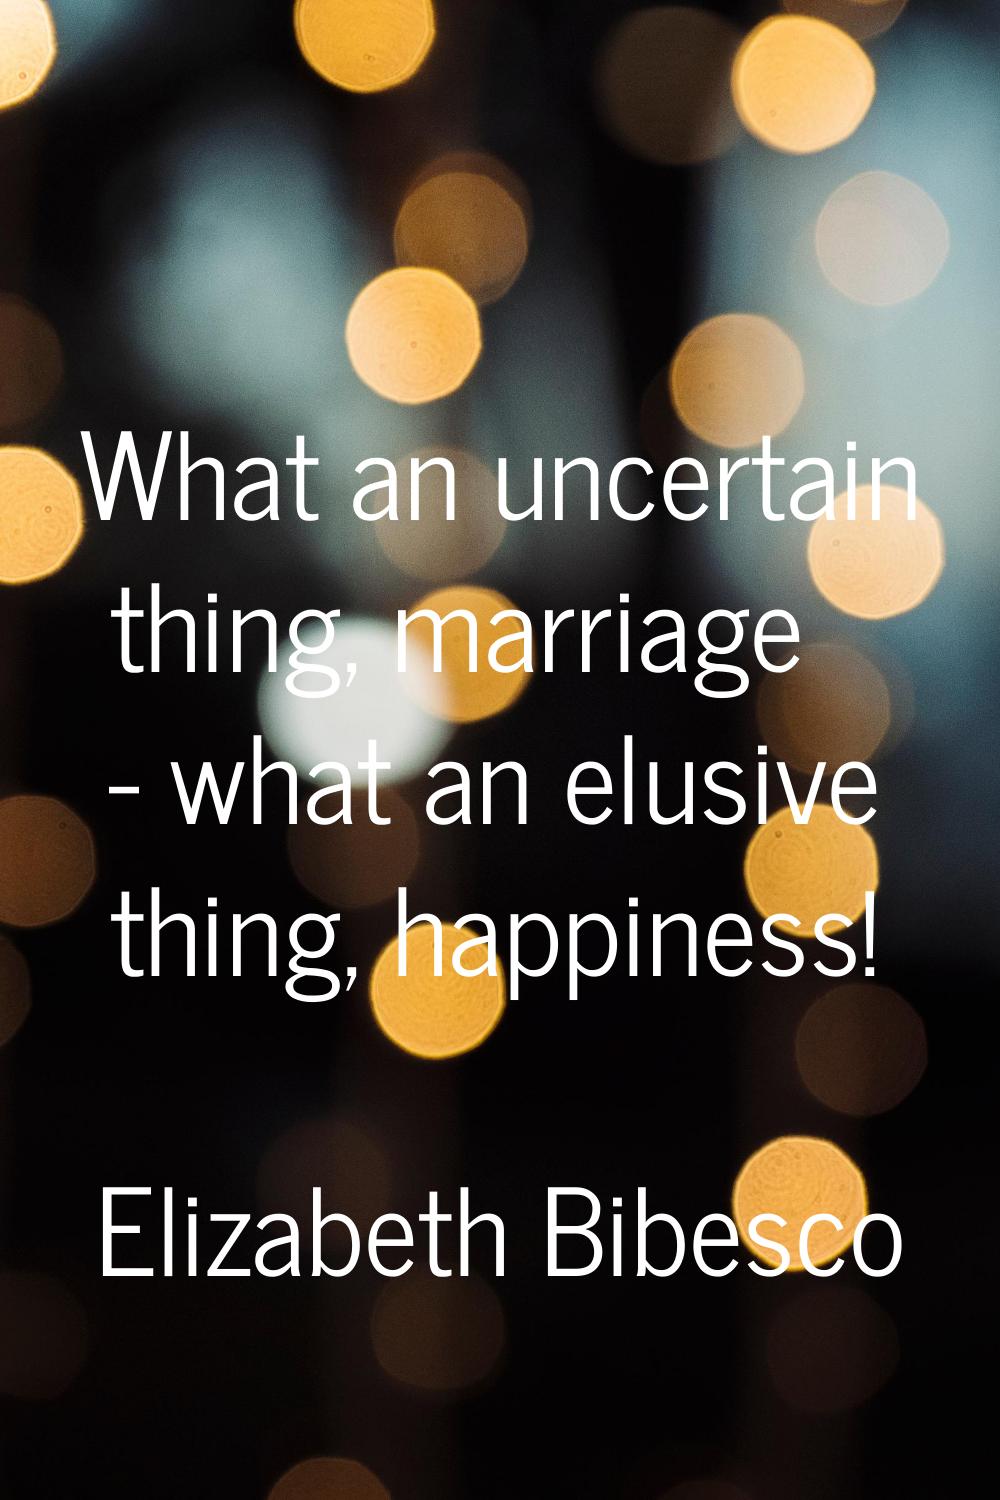 What an uncertain thing, marriage - what an elusive thing, happiness!